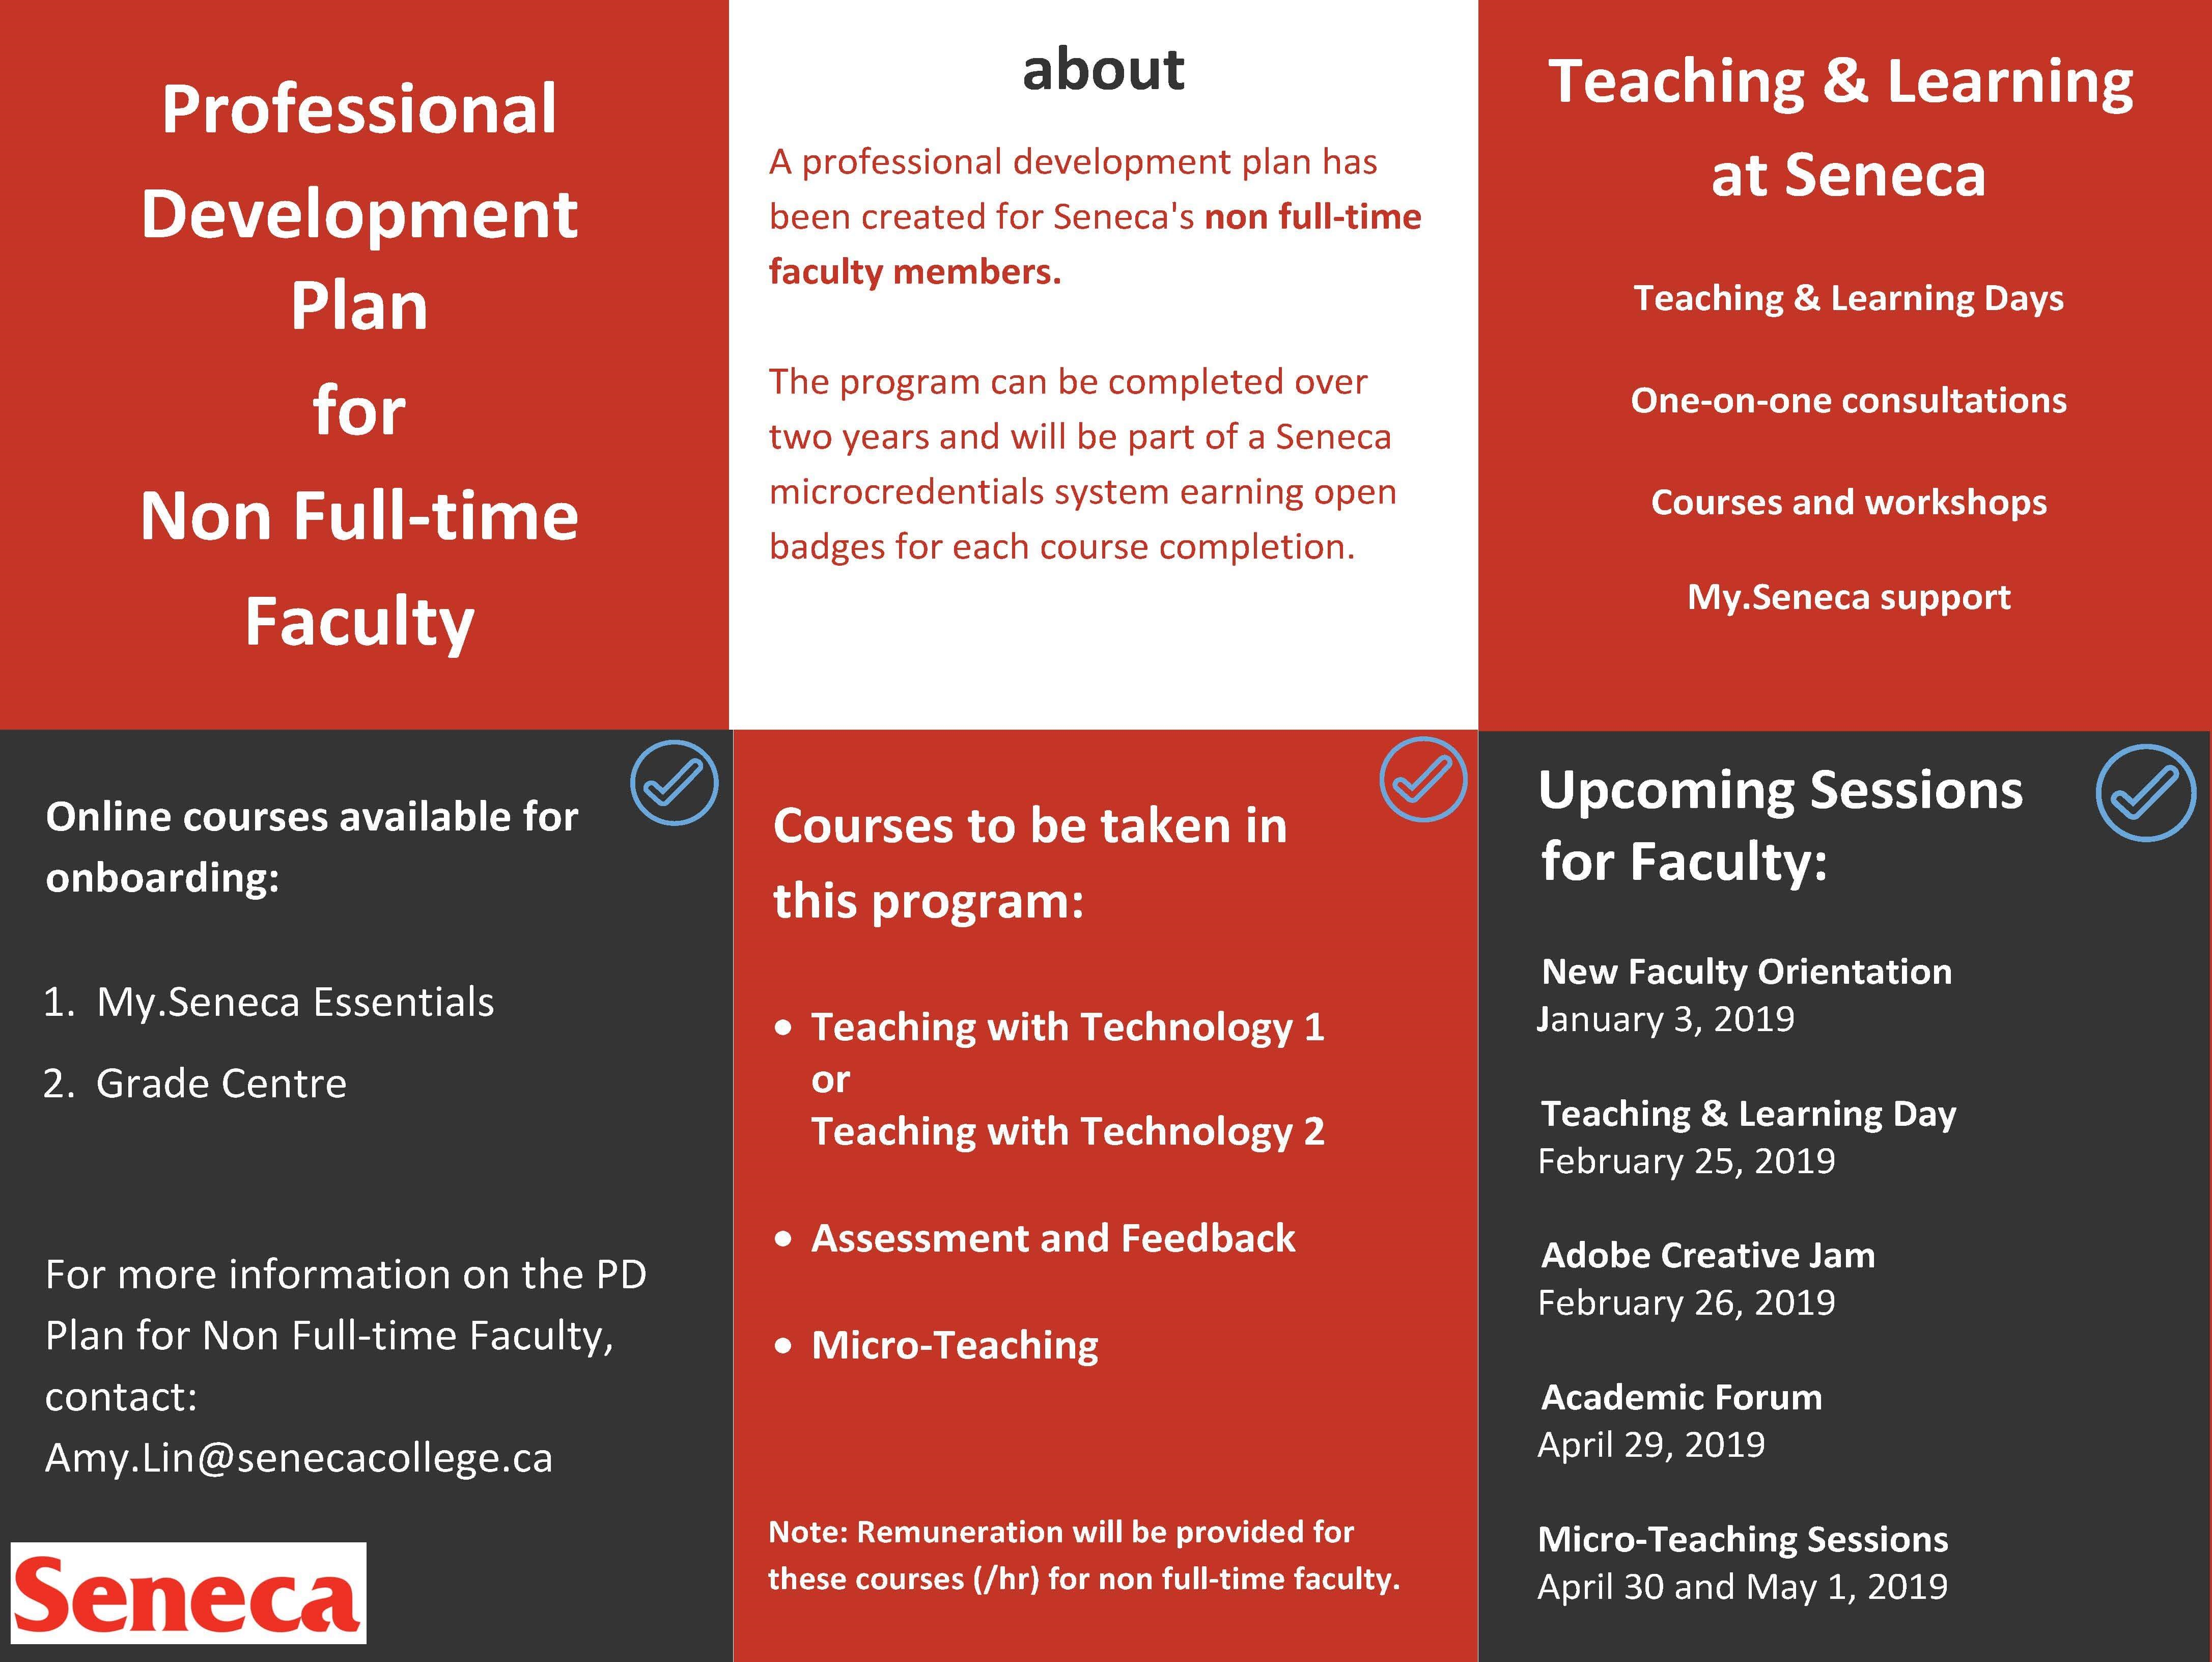 The professional development plan for non full-time faculty members